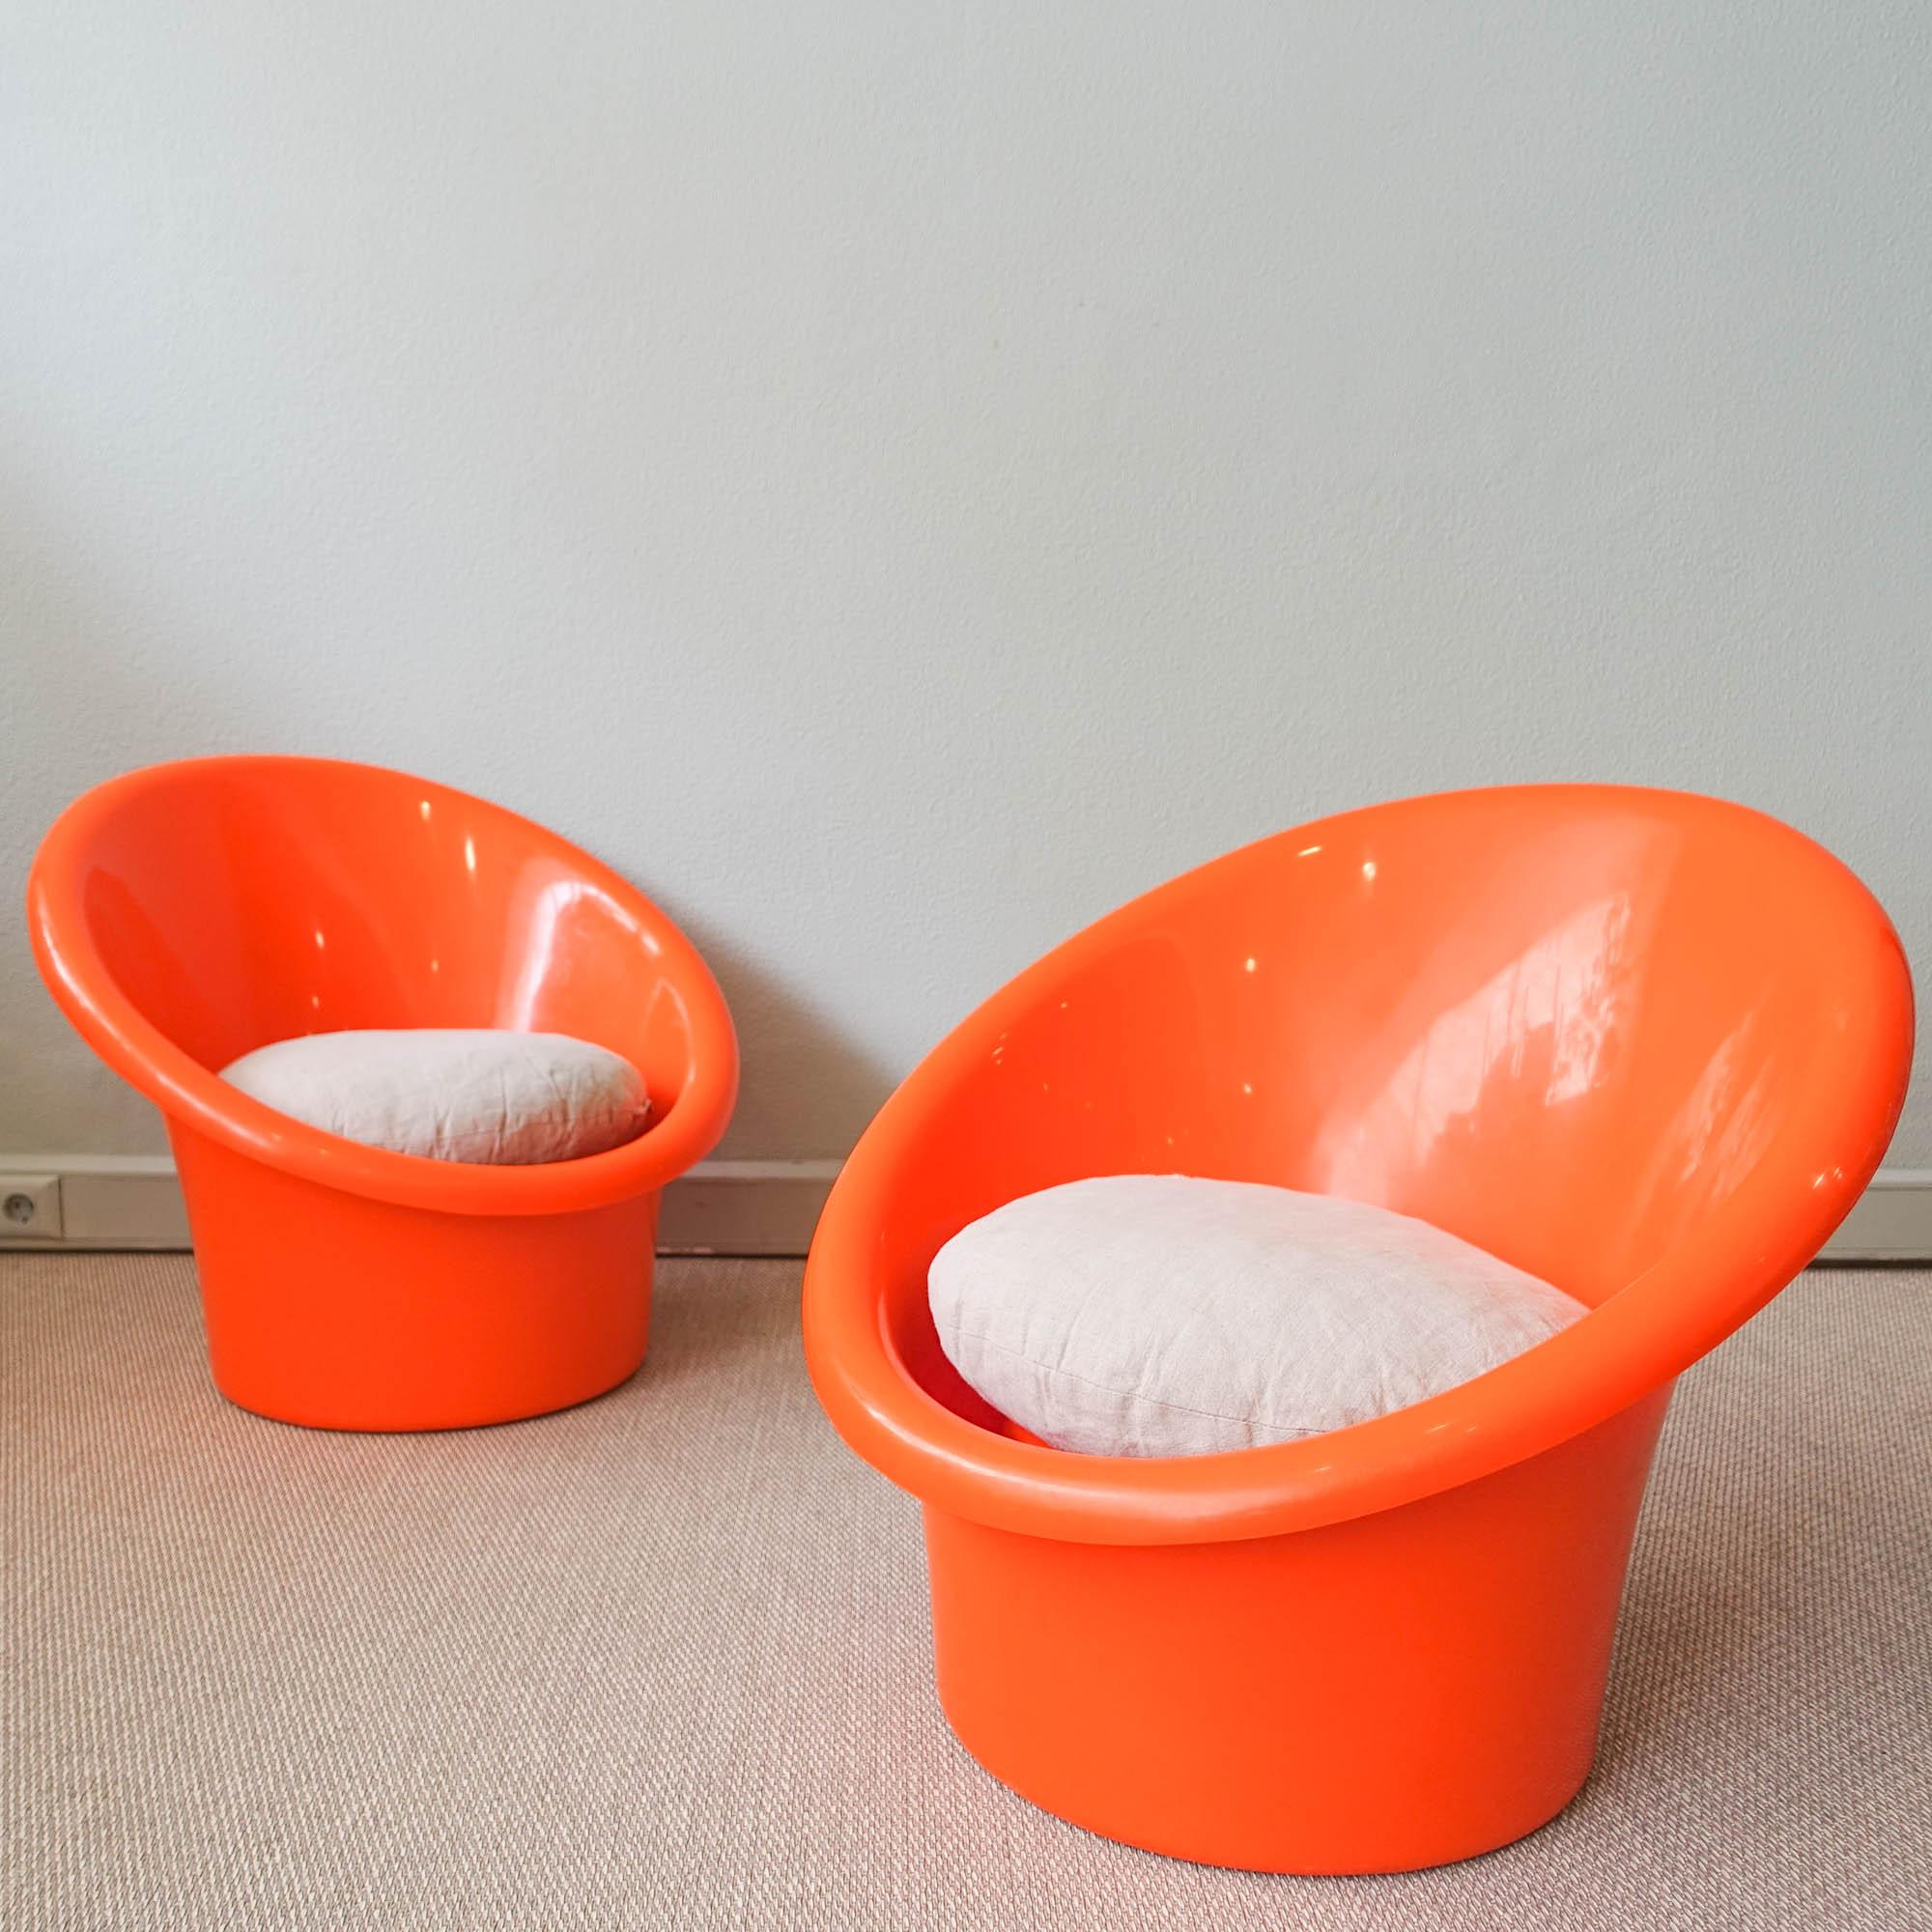 Skopa easy chair was designed by Danish duo Ole Gjerlov-Knudsen & Torben Lind, and produced by Orth Plast for IKEA, in Denmark, during the 1970's. Each chair has an orange plastic shell with loose seat cushion. Can be used for inside or outside. In